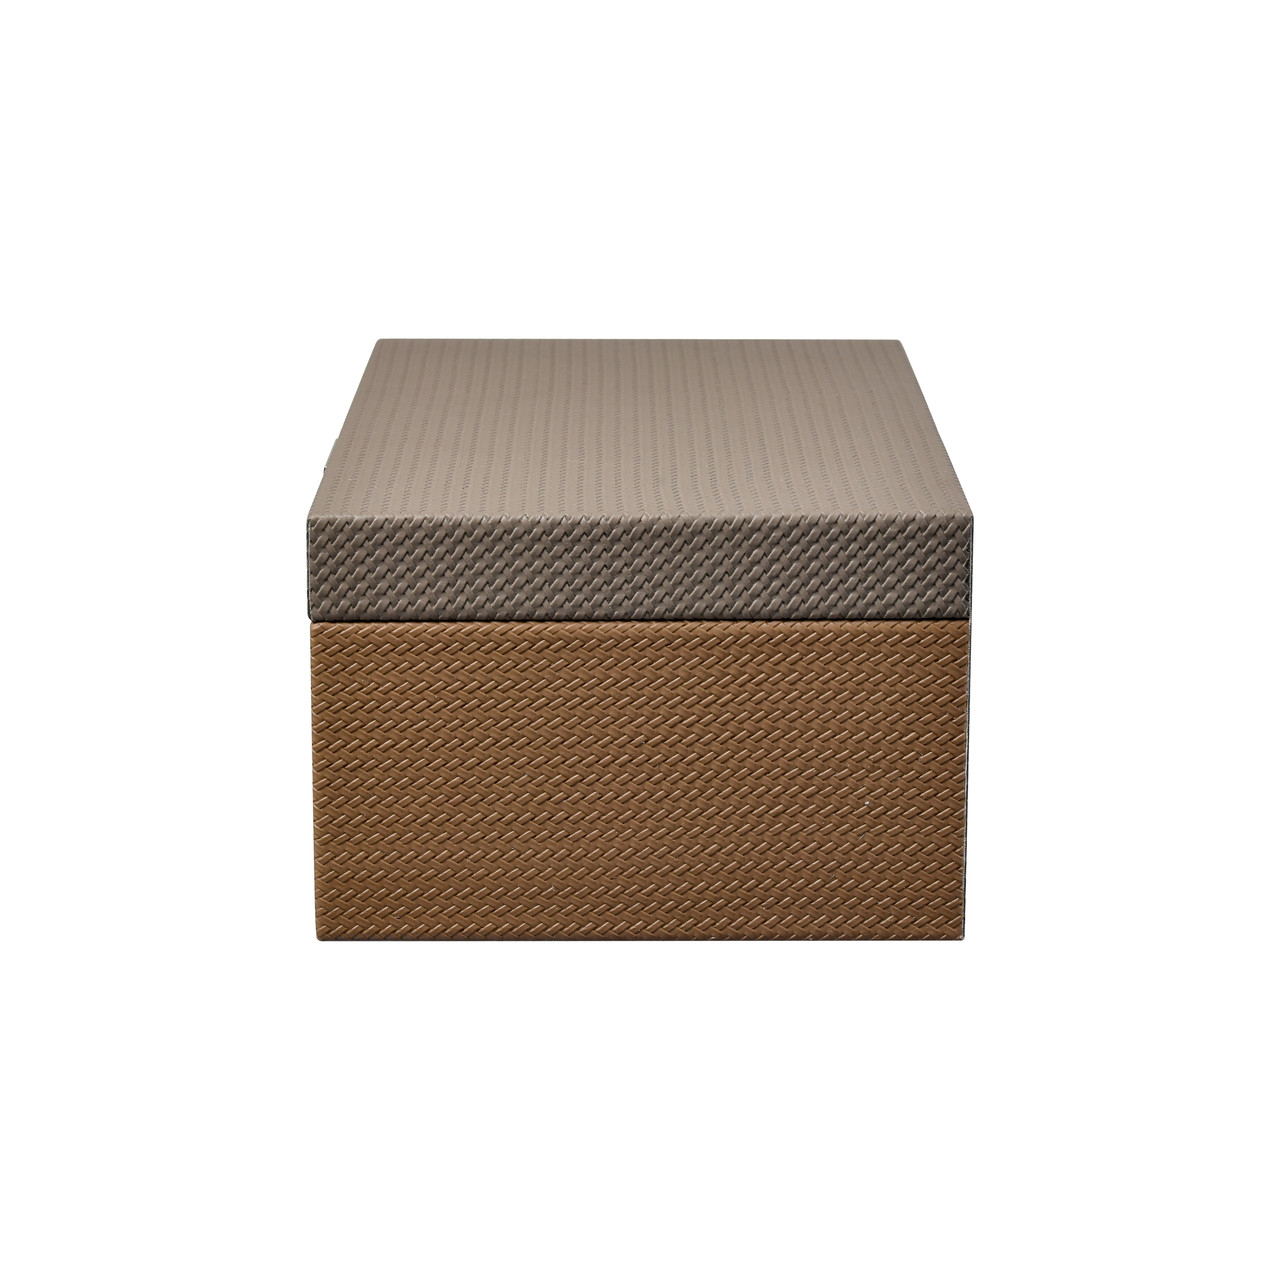 ELK HOME S0057-11217/S2 Connor Box - Set of 2 Brown